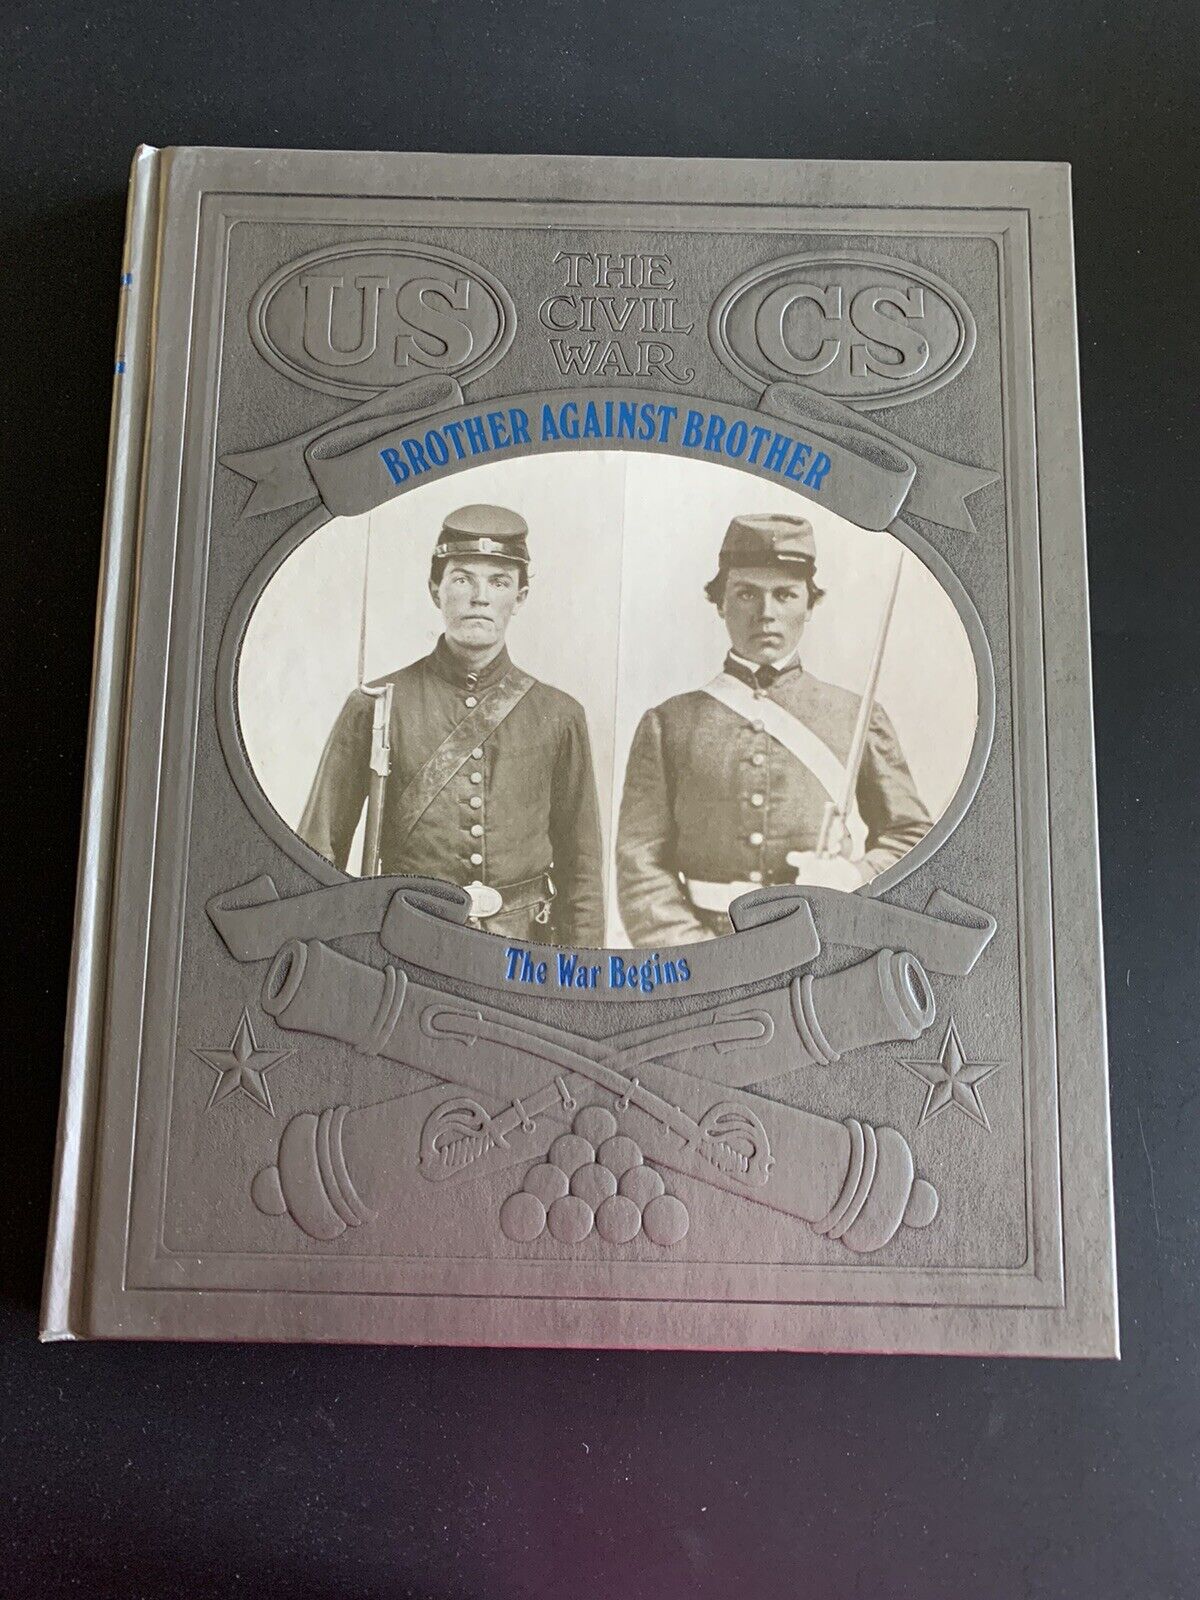 Brother Against Brother hardback book from The Civil War series of Time Life 